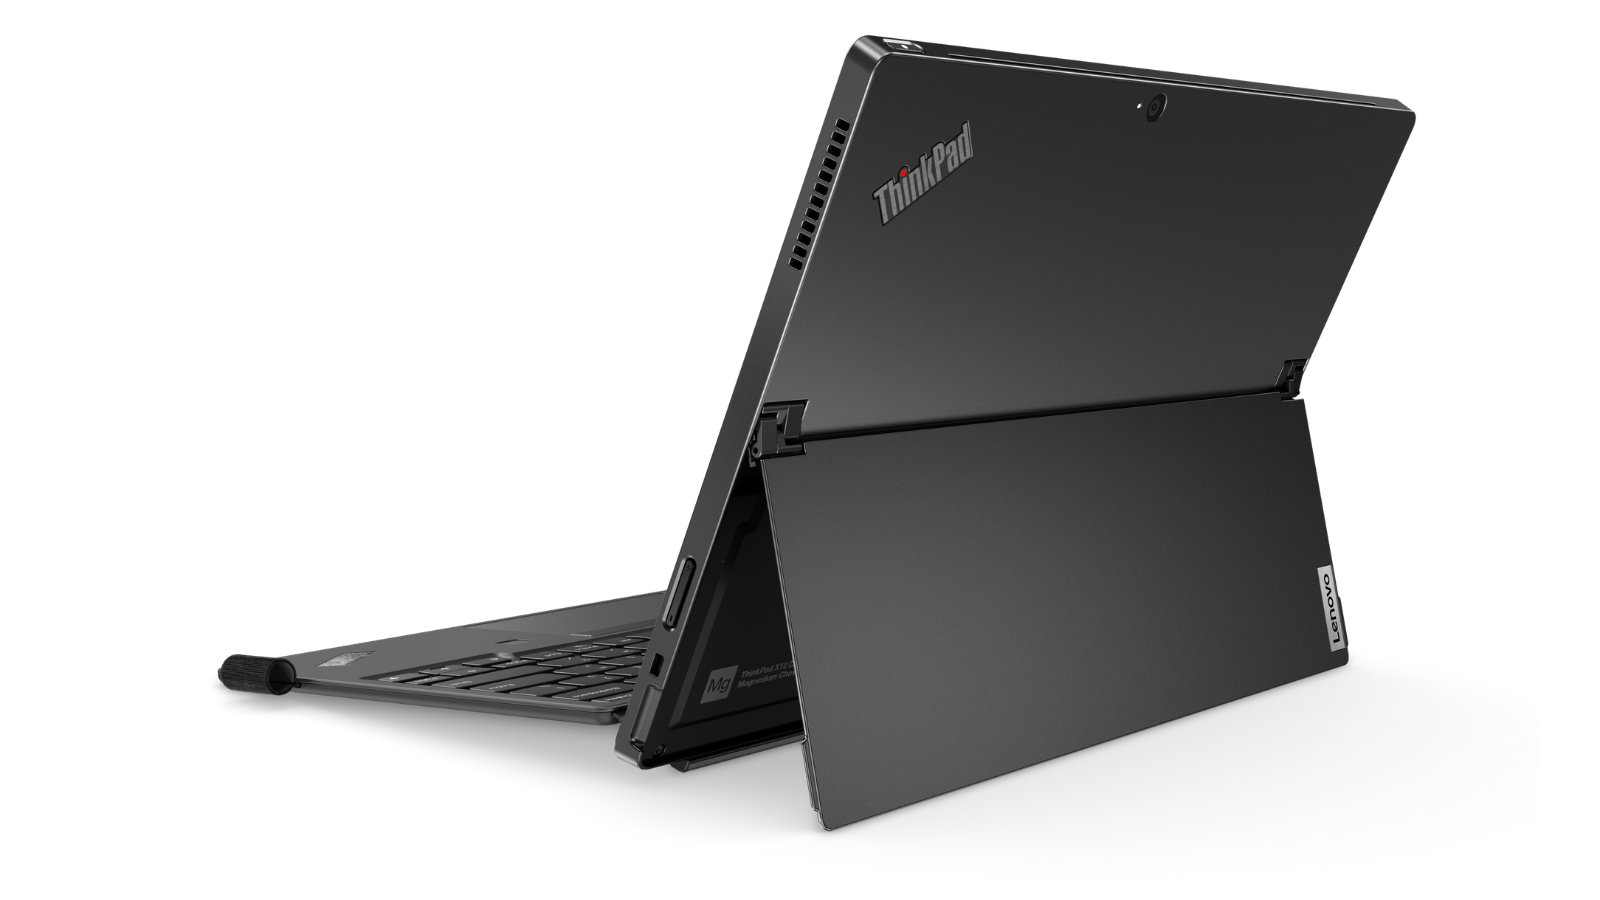 microsoft, lenovo takes on microsoft surface pro with the power of intel core ultra, ai, and wi-fi 7 — meet the thinkpad x12 detachable gen 2